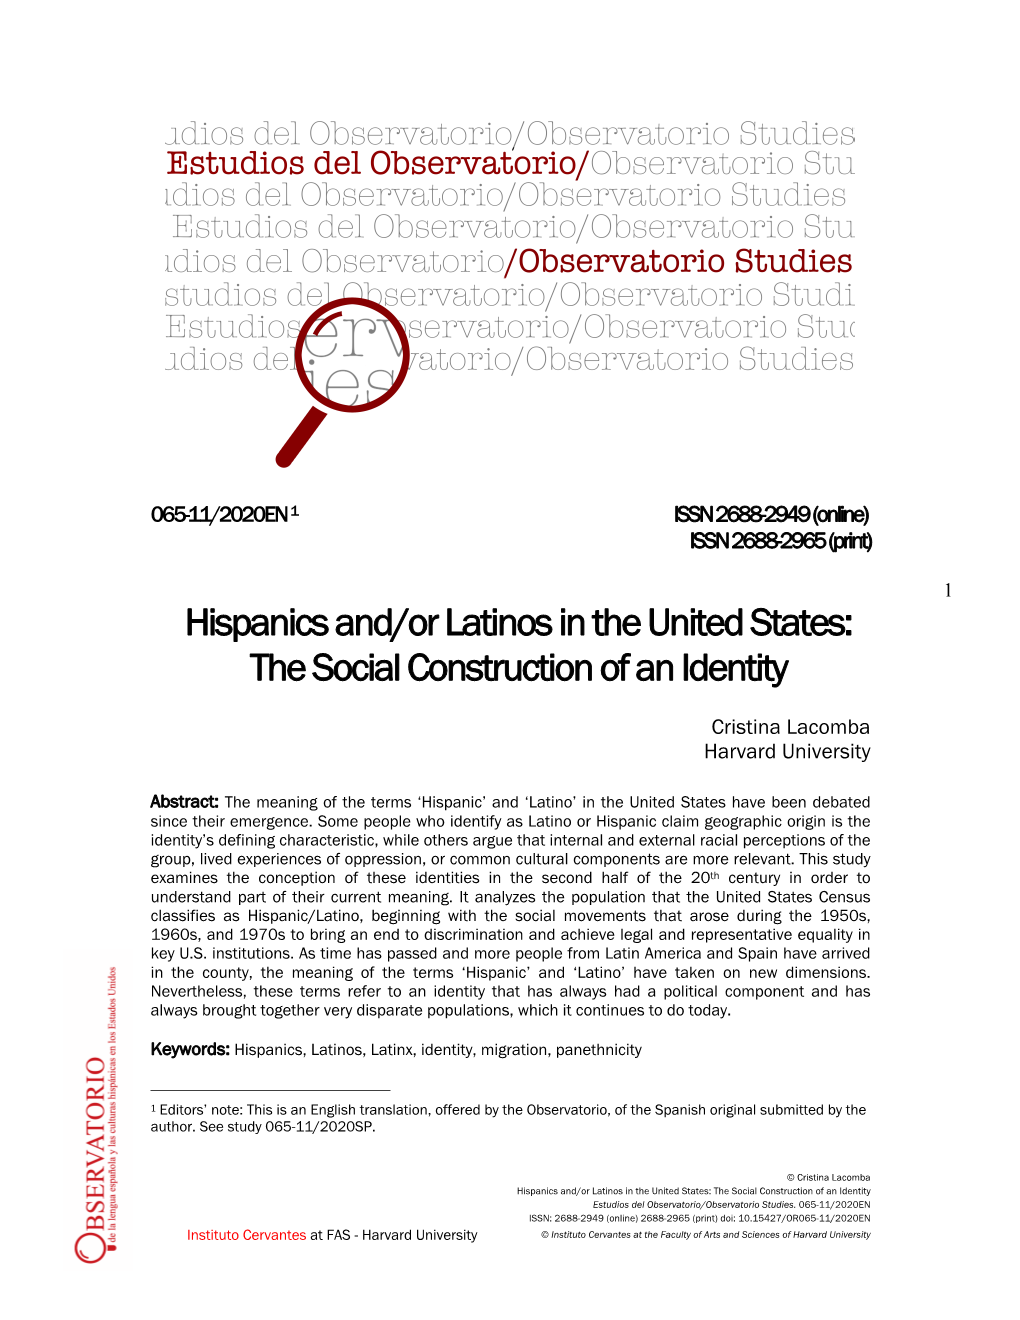 Hispanics And/Or Latinos in the United States: the Social Construction of an Identity